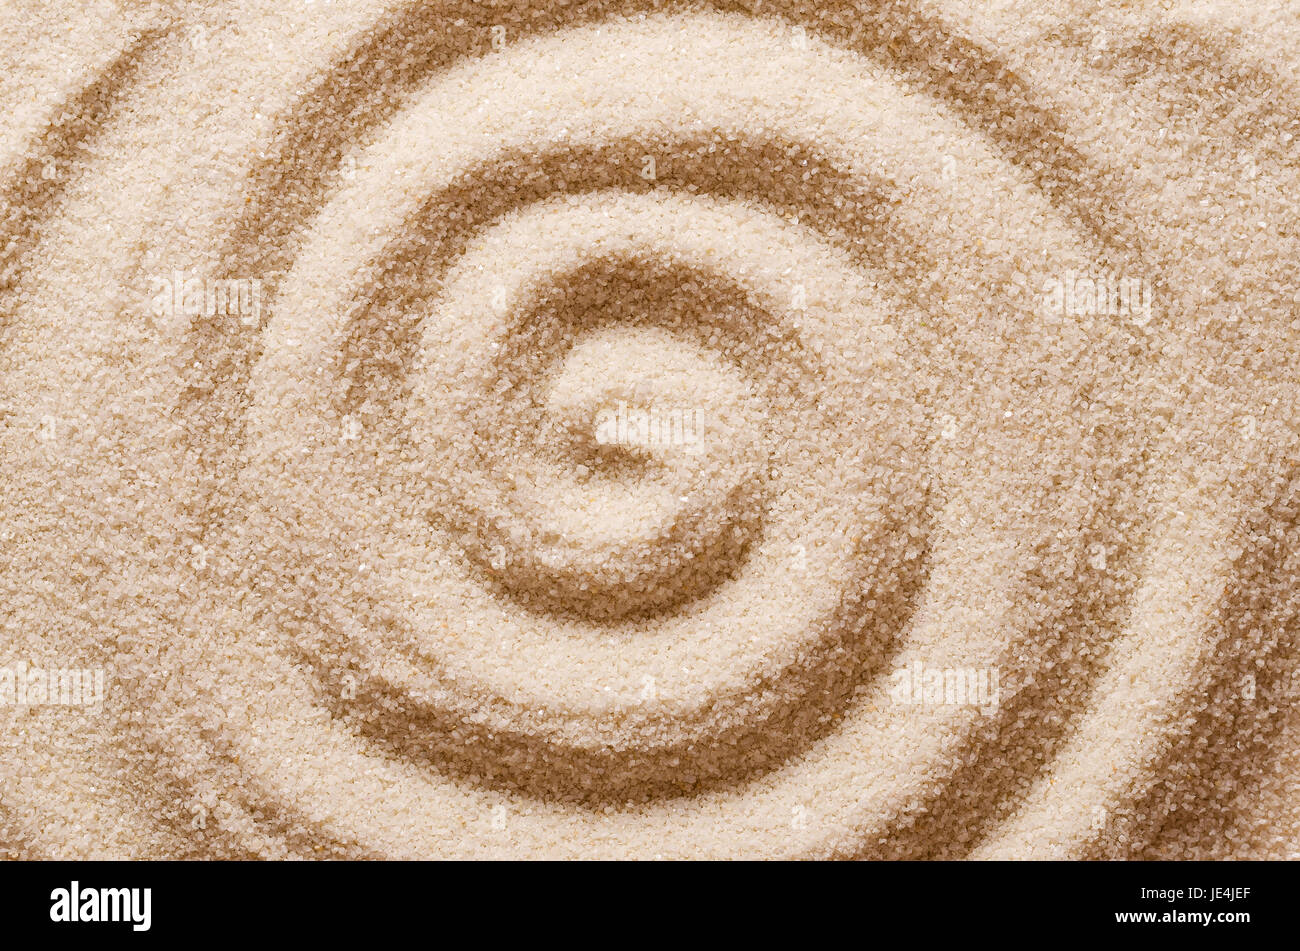 Spiral in the sand. Archimedean spiral made with the finger in dry ocherous sand. Macro photo close up from above. Stock Photo